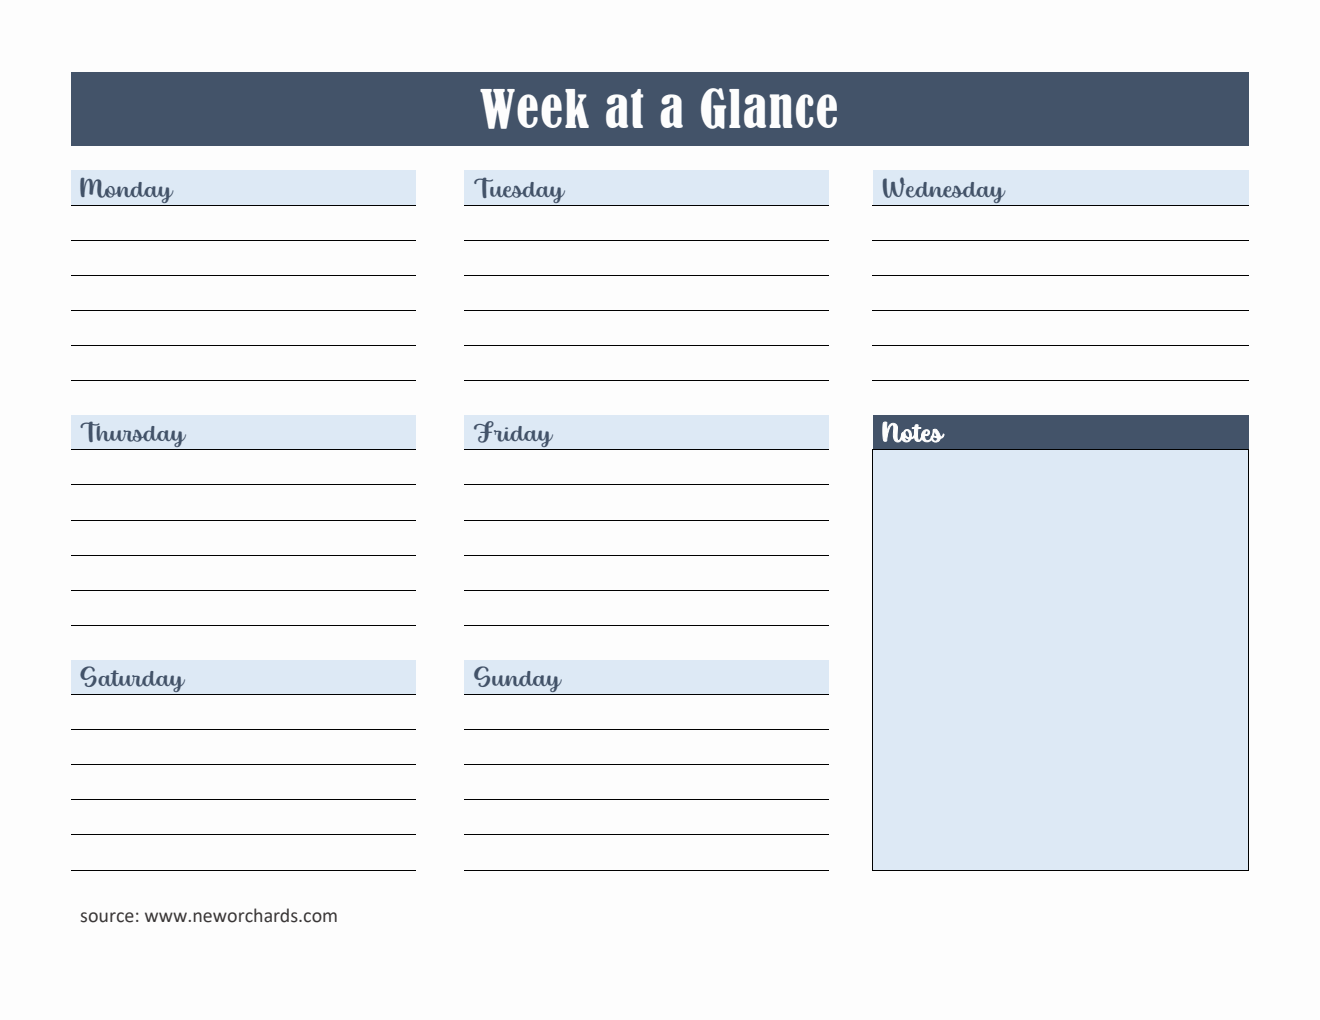 Editable Week at a Glance Template (Word)